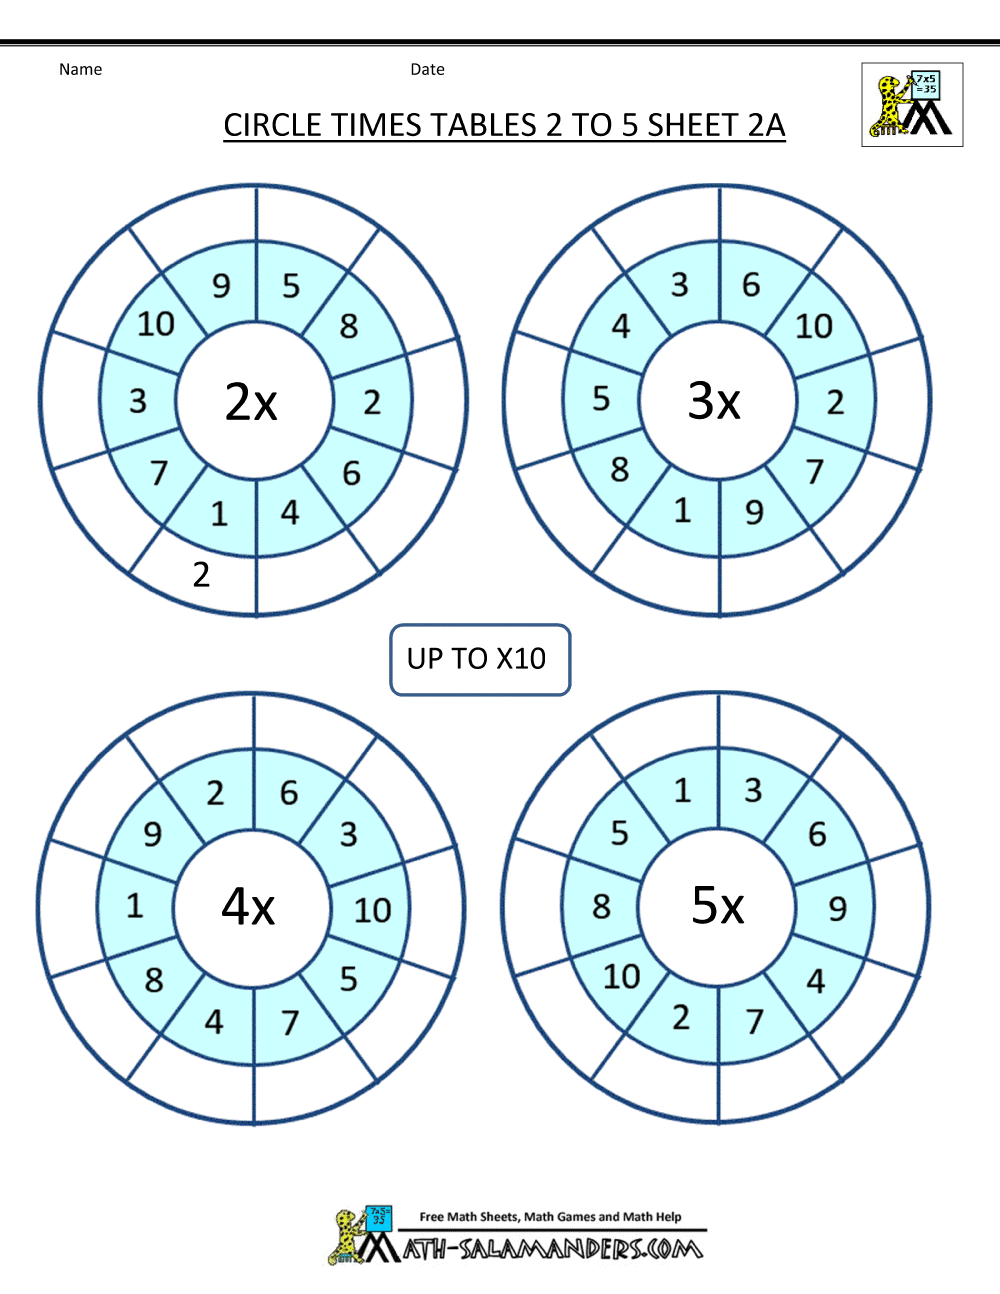 Times Tables Worksheets Circles 1 to 10 Times Tables